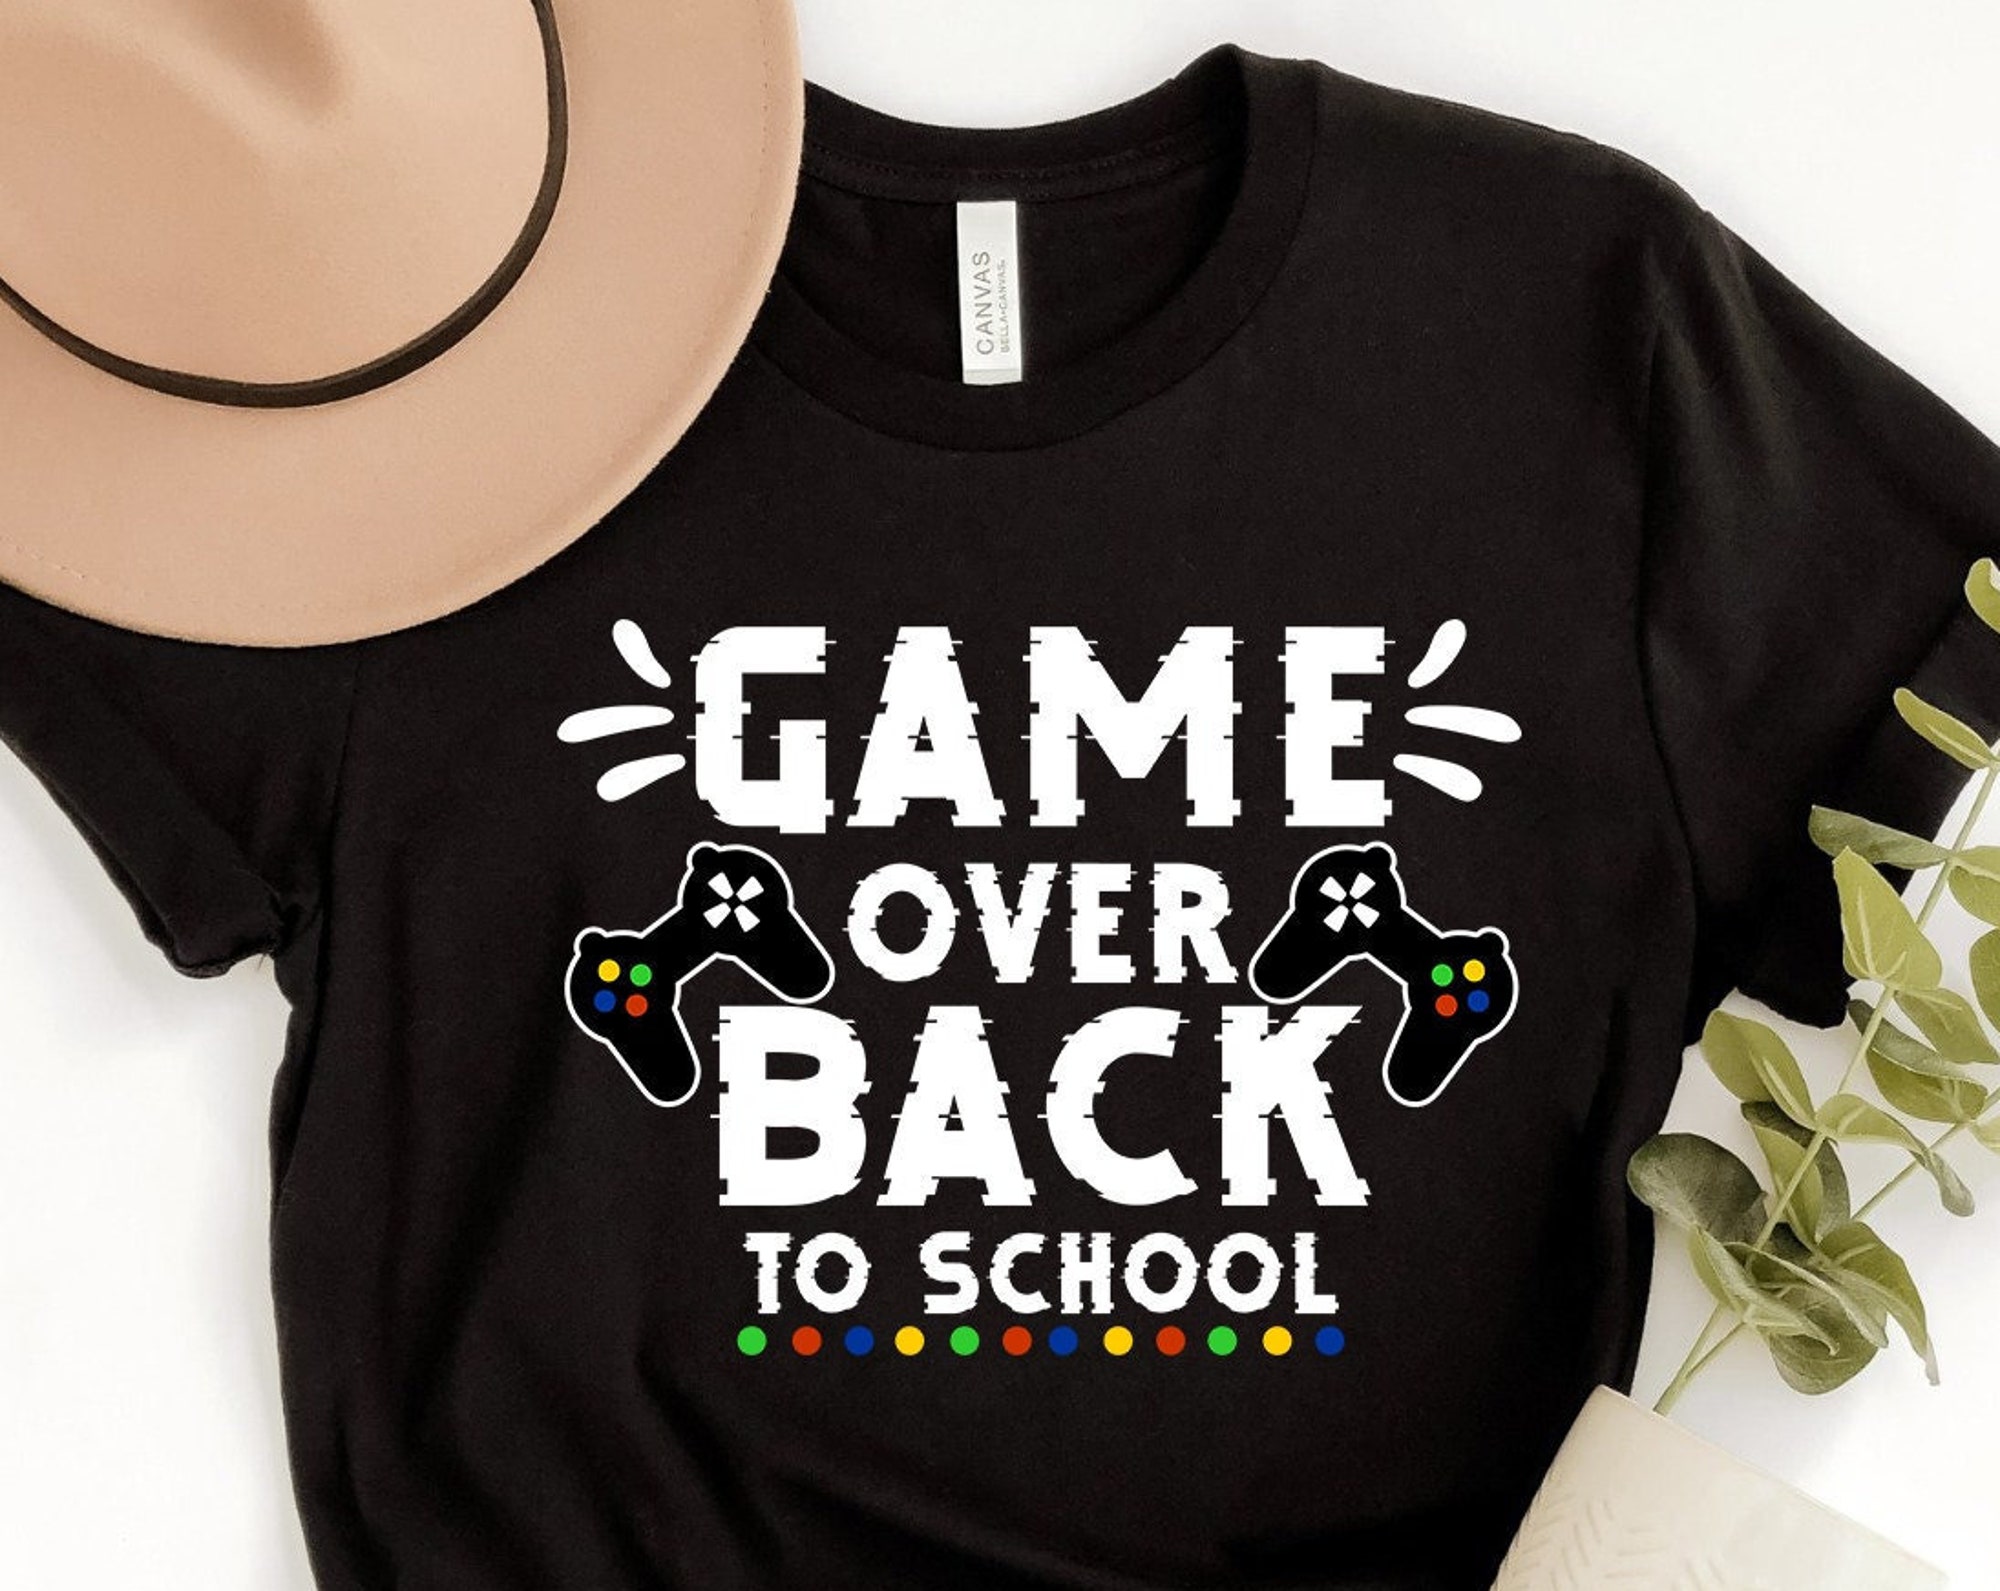 Discover Game Over Back To School Shirt, Back to School Shirt